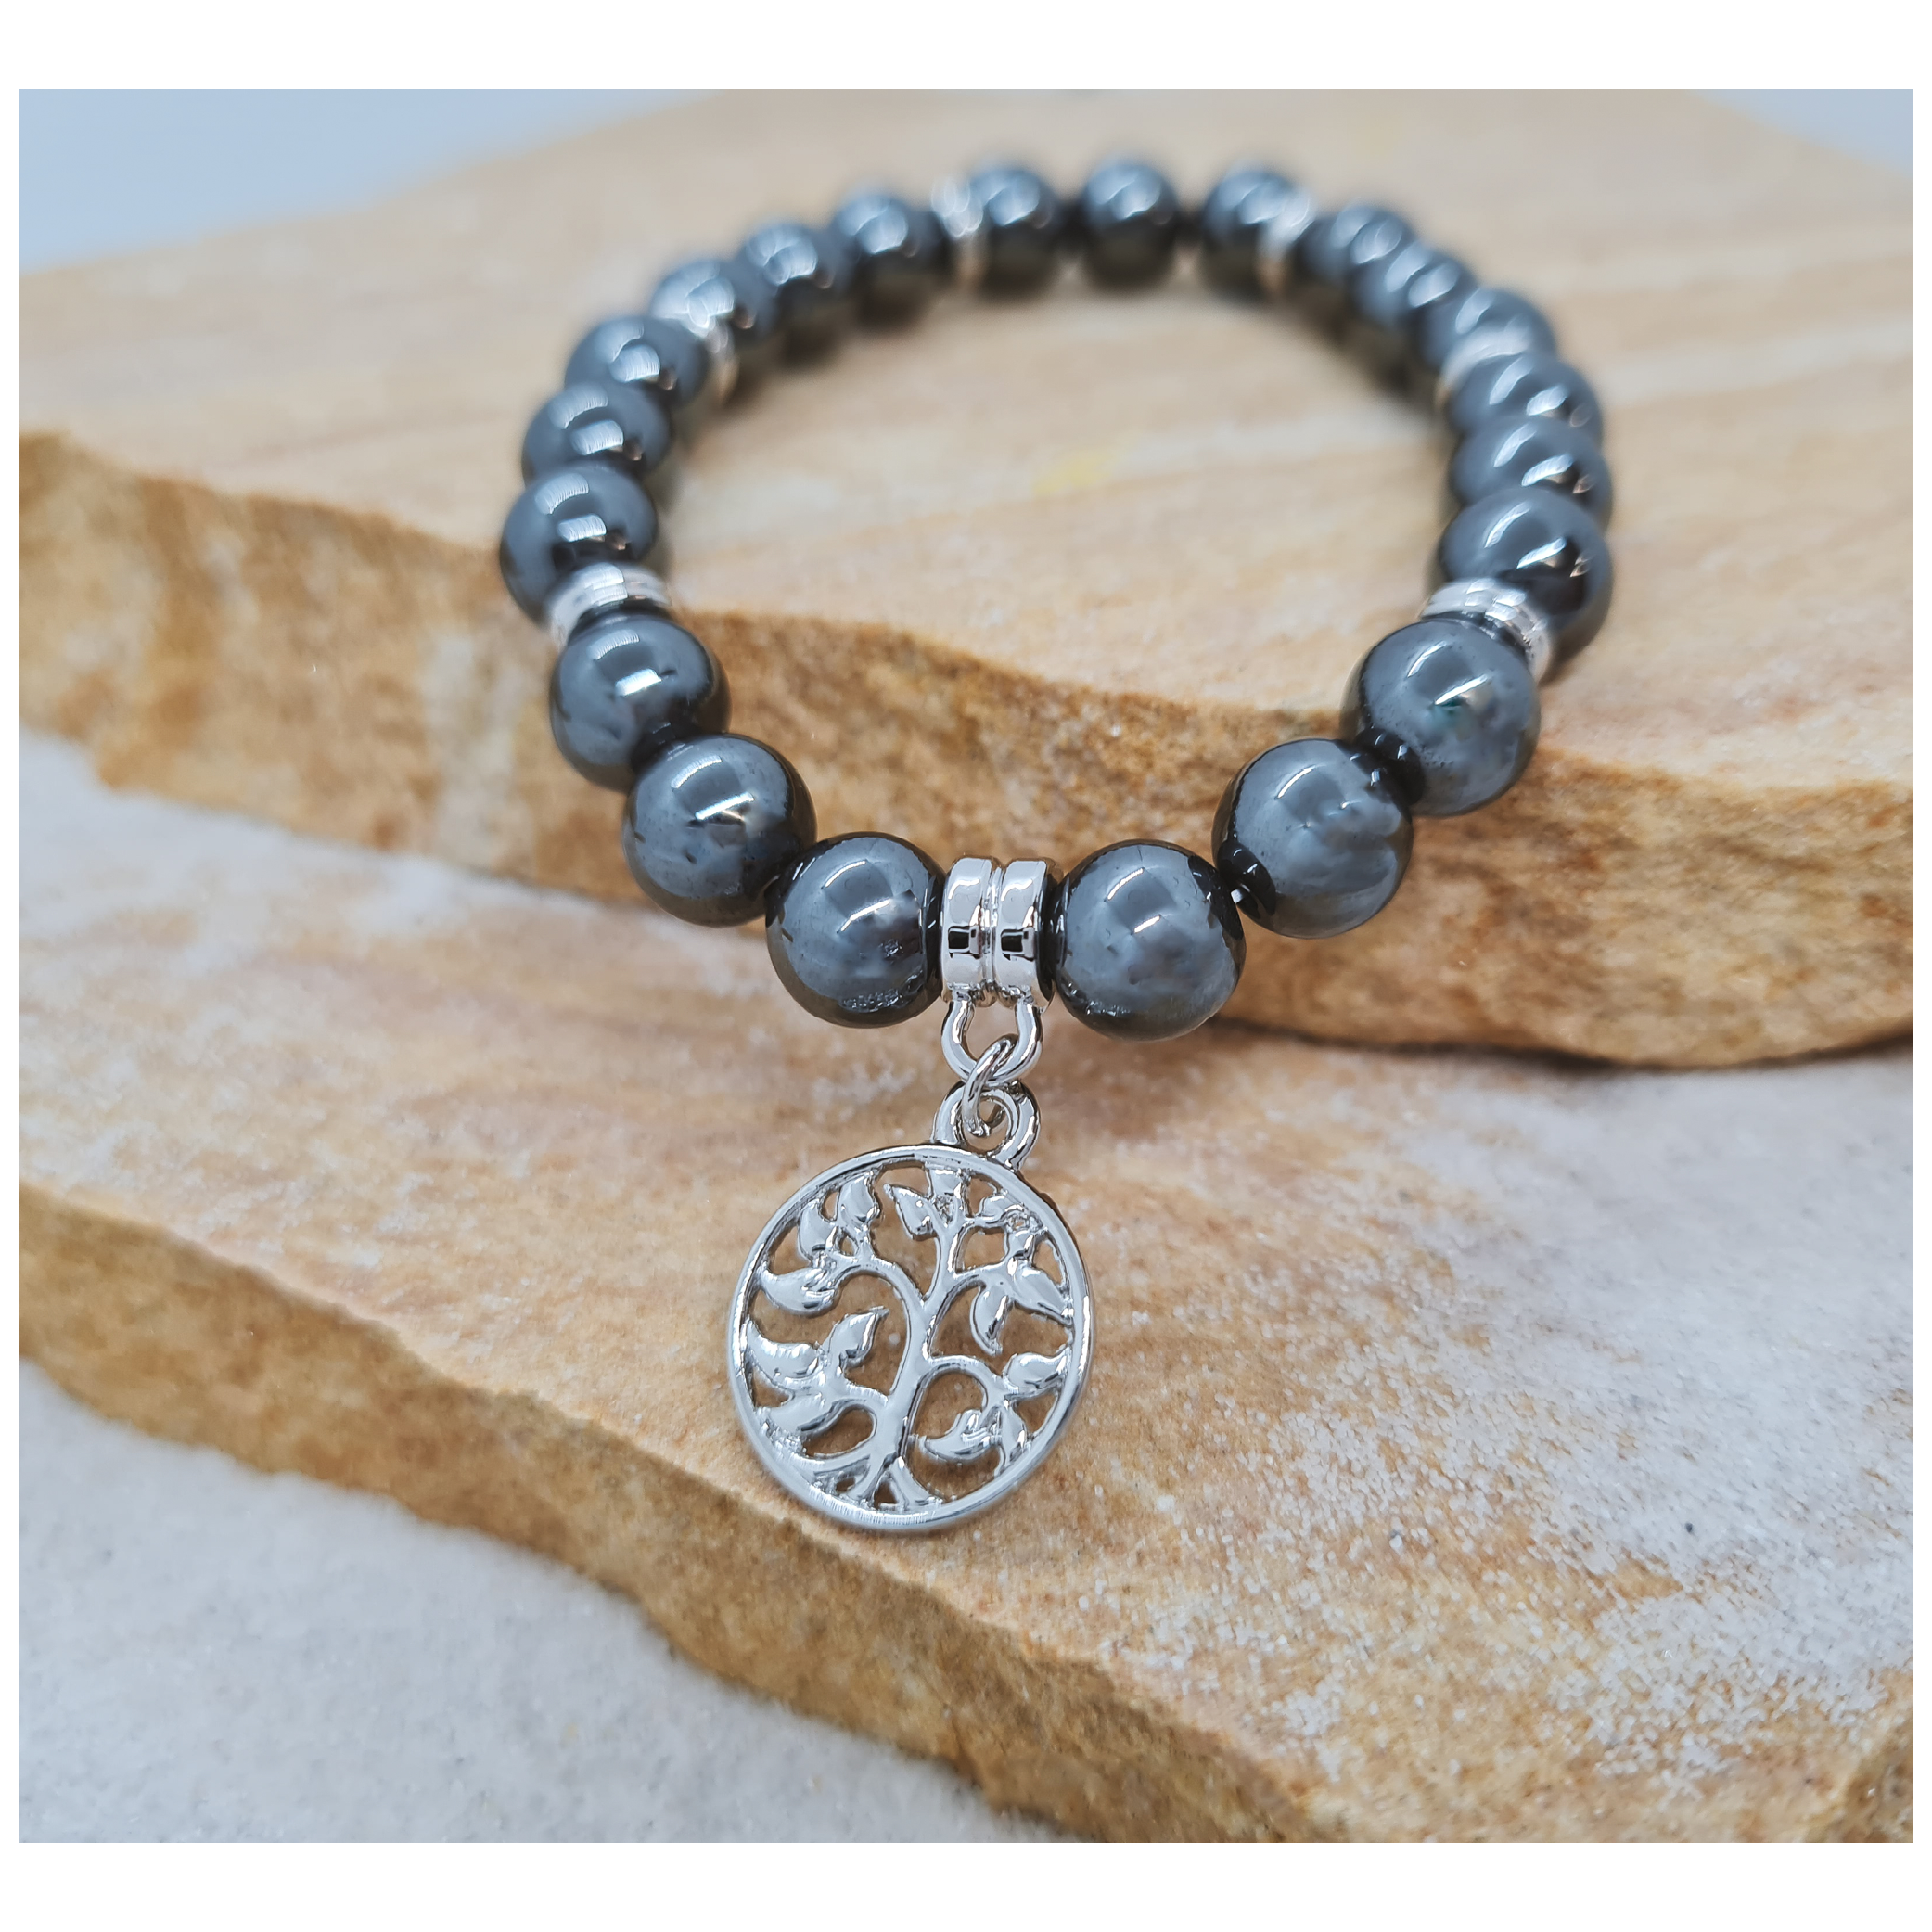 Hematite 8mm crystal bead bracelet with silver tree of life charm